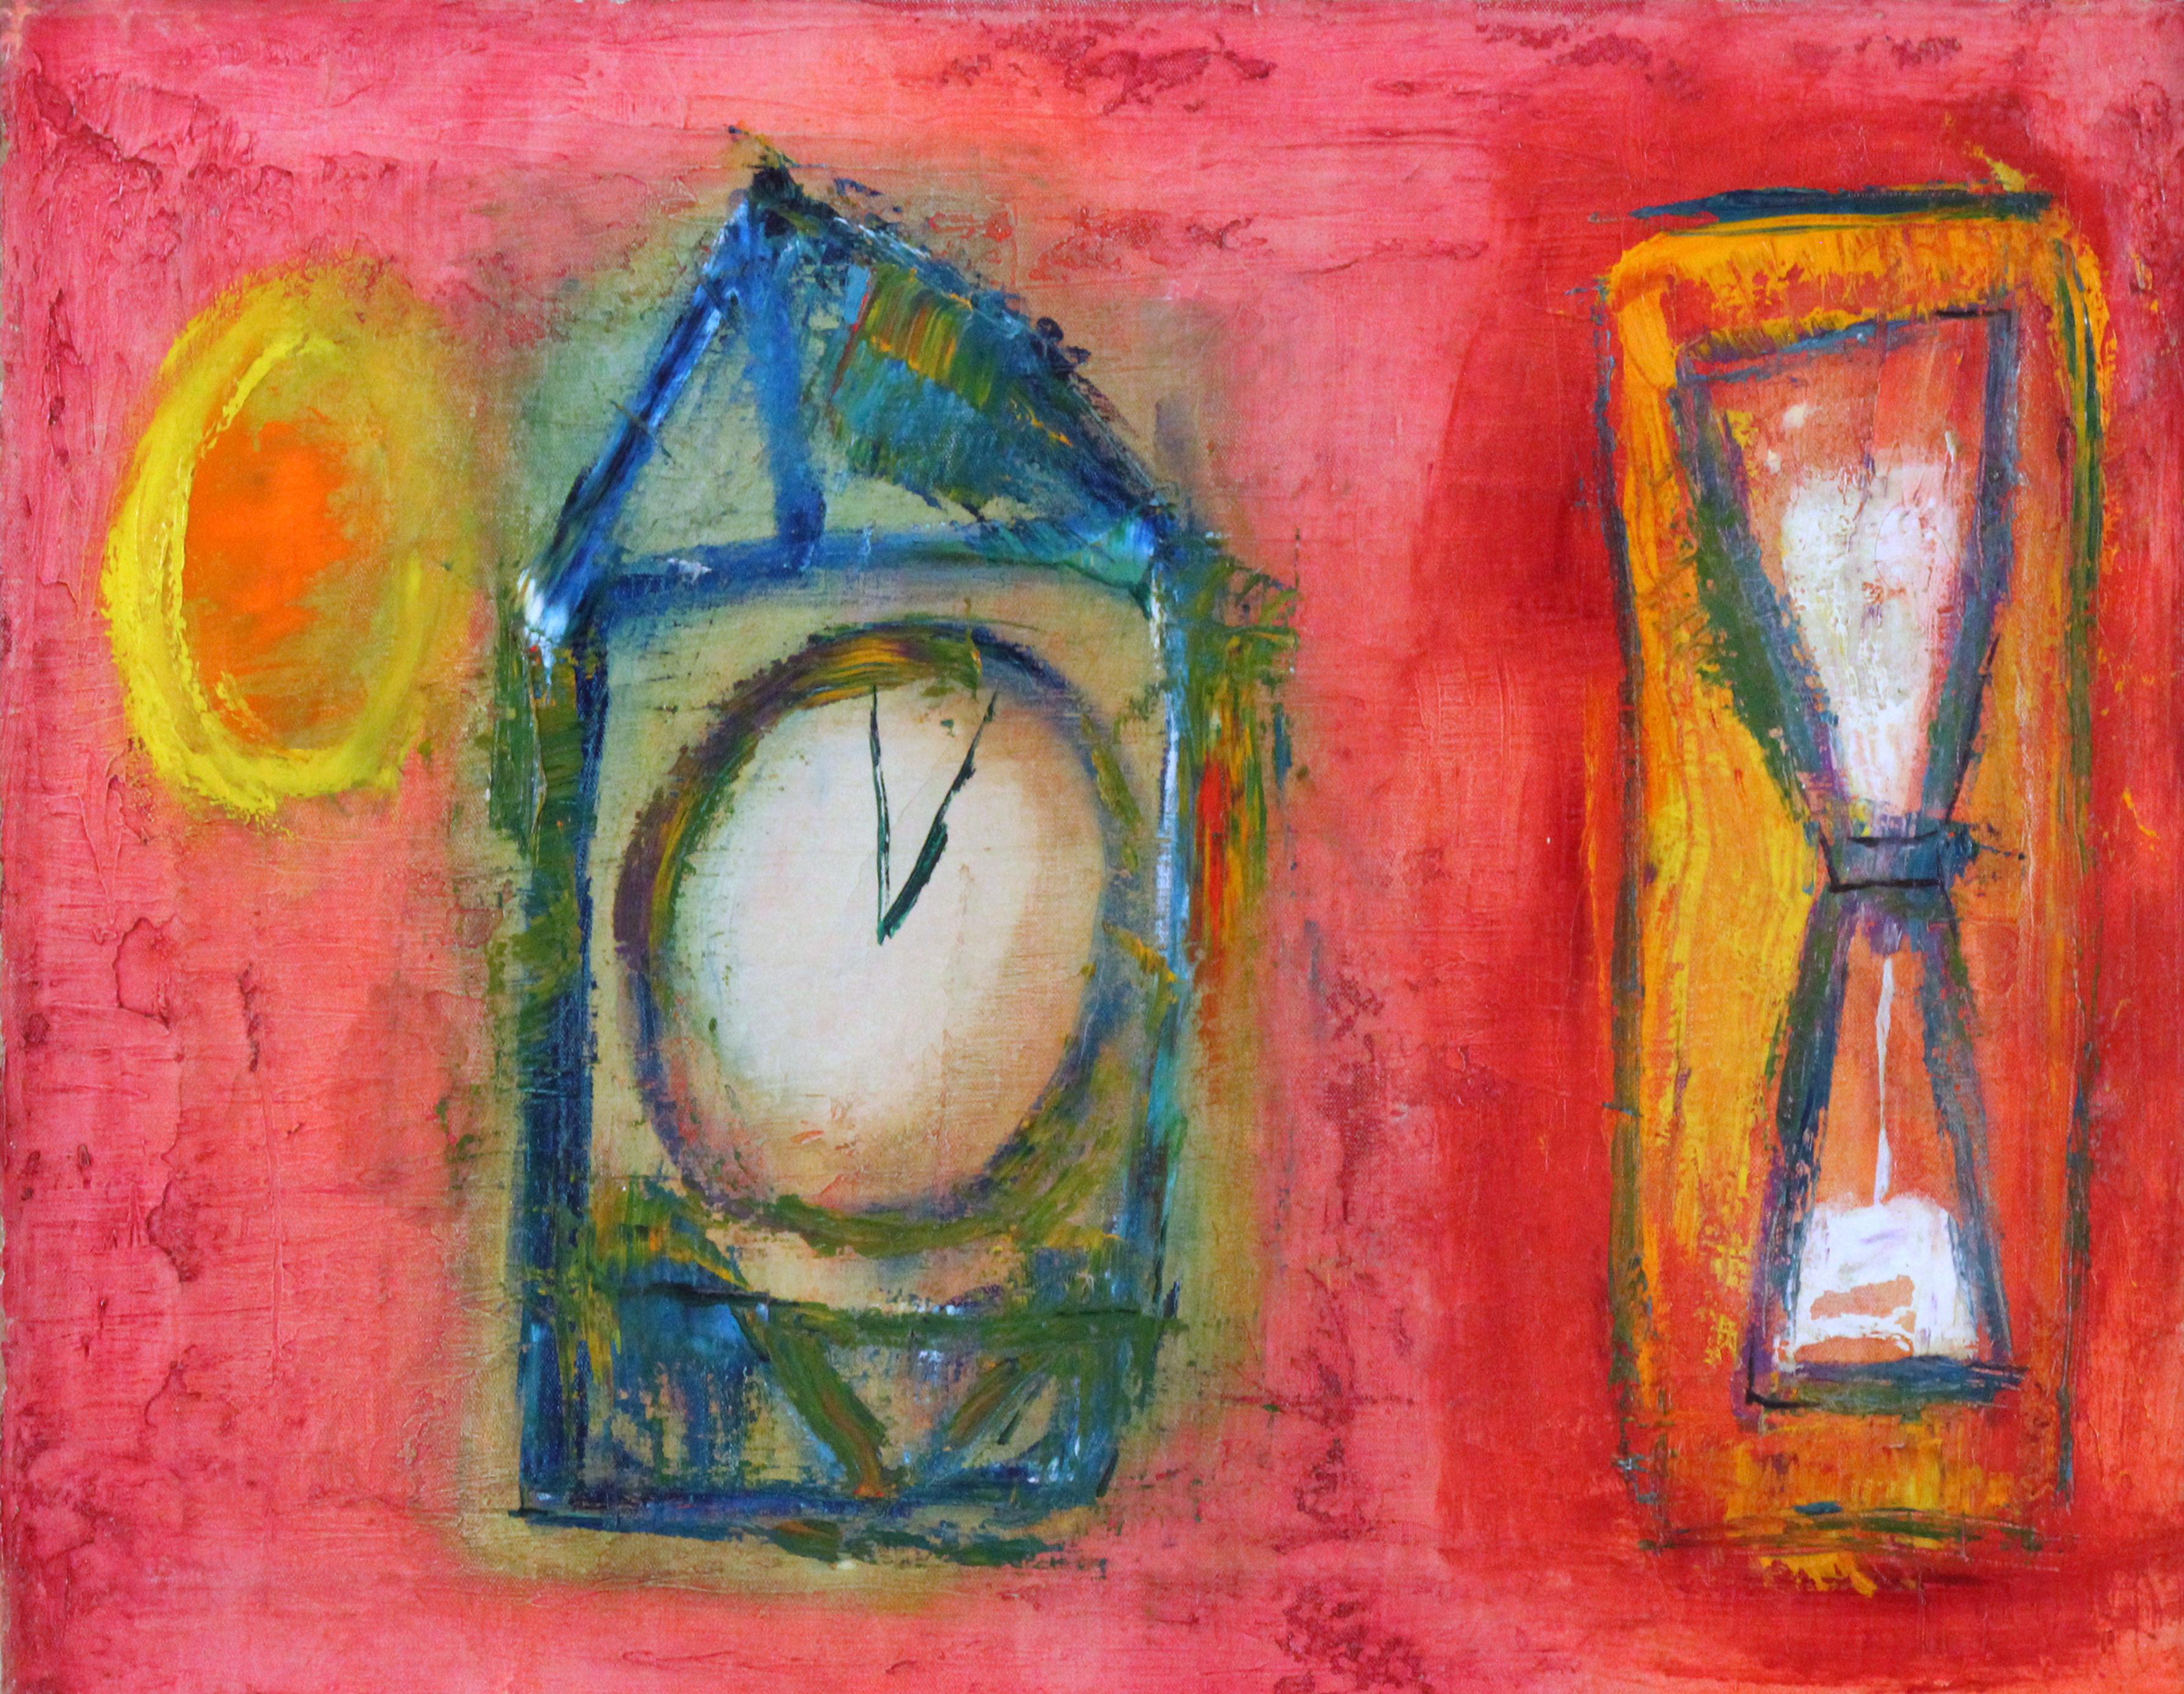 Time, Abstract and Spiritual Commentary by Female Modernist